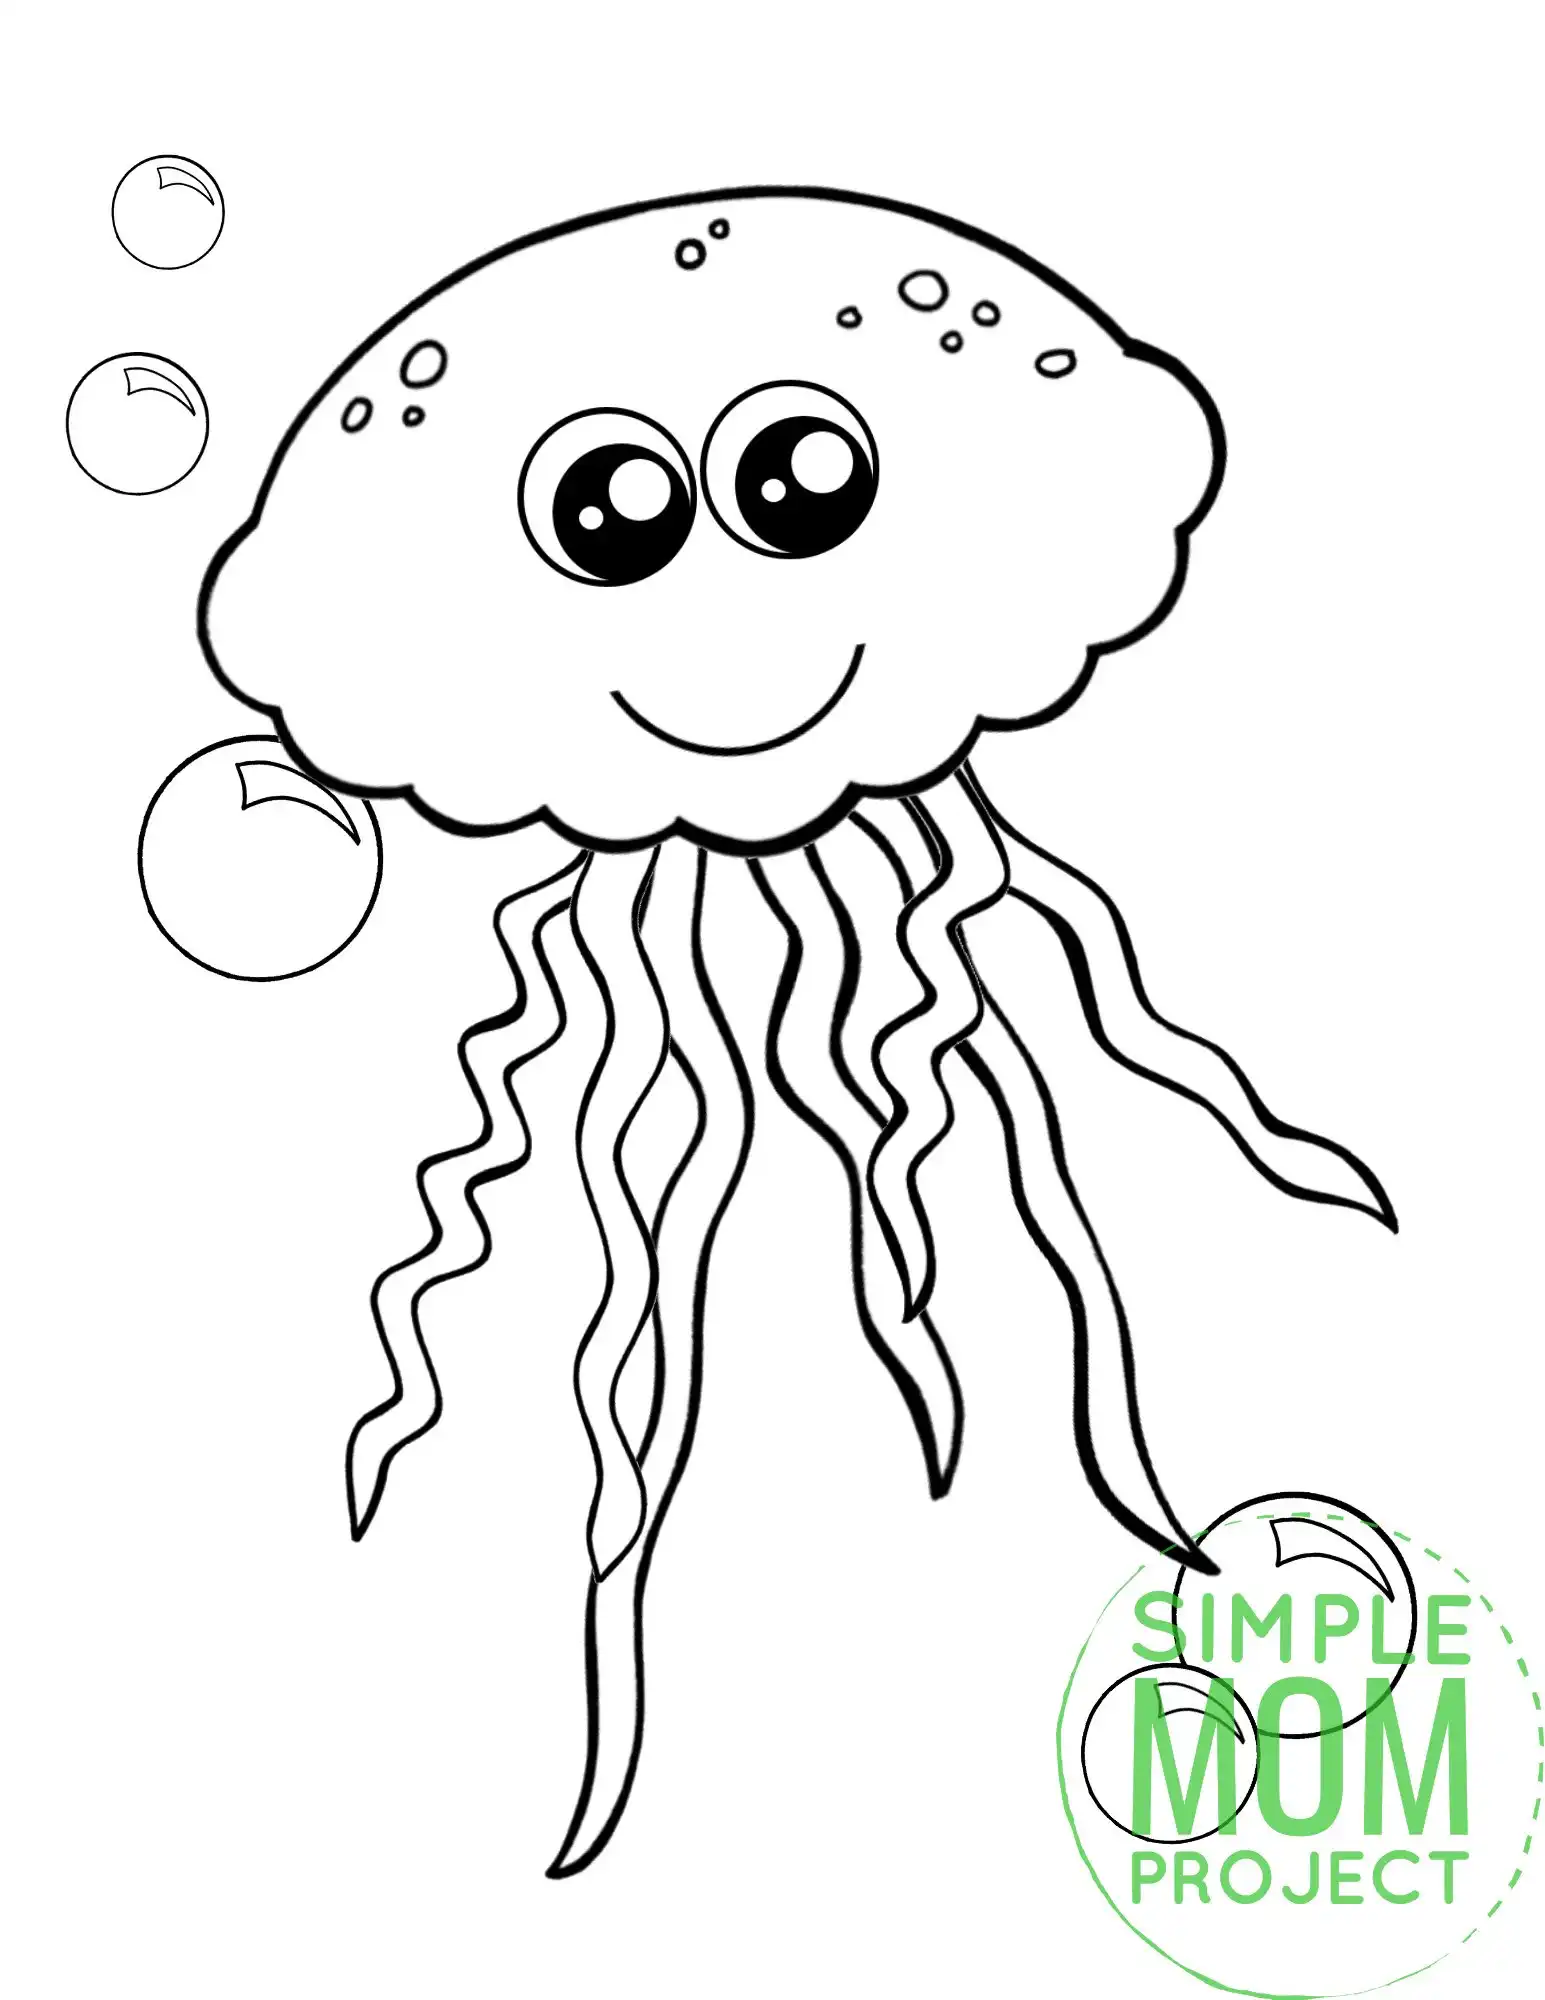 Free printable jellyfish coloring page â simple mom project